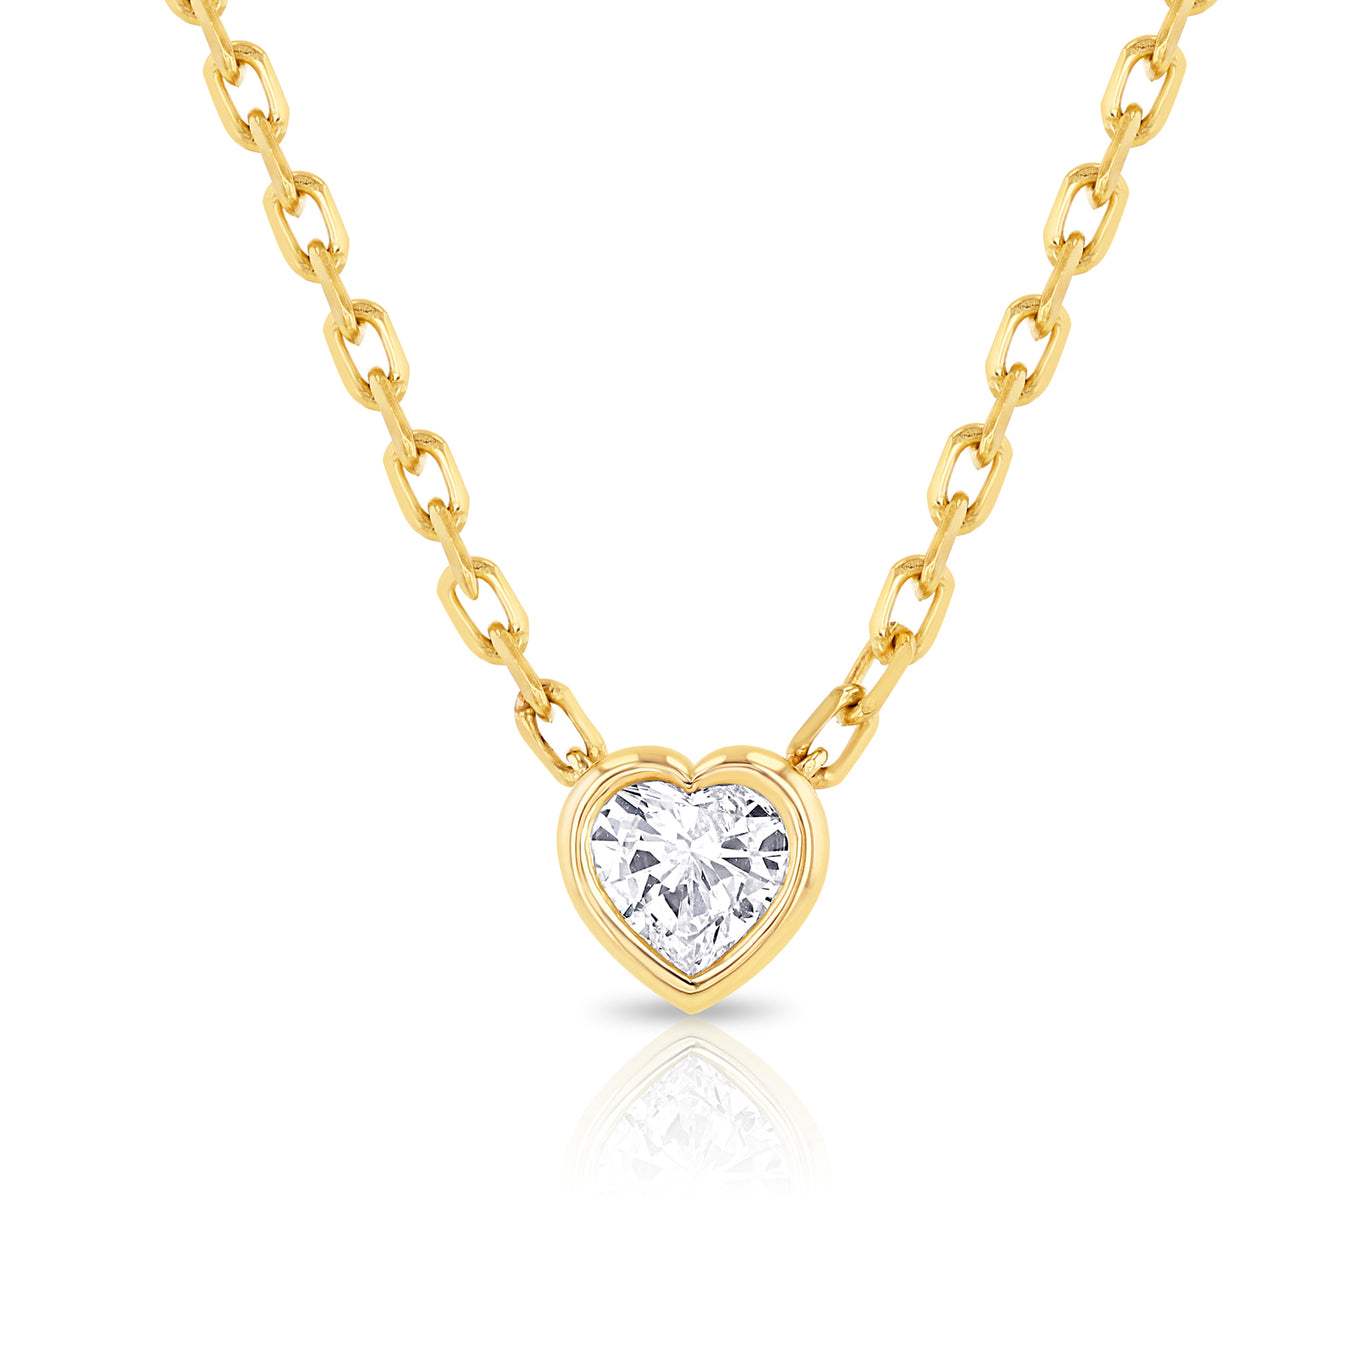 Amor Necklace